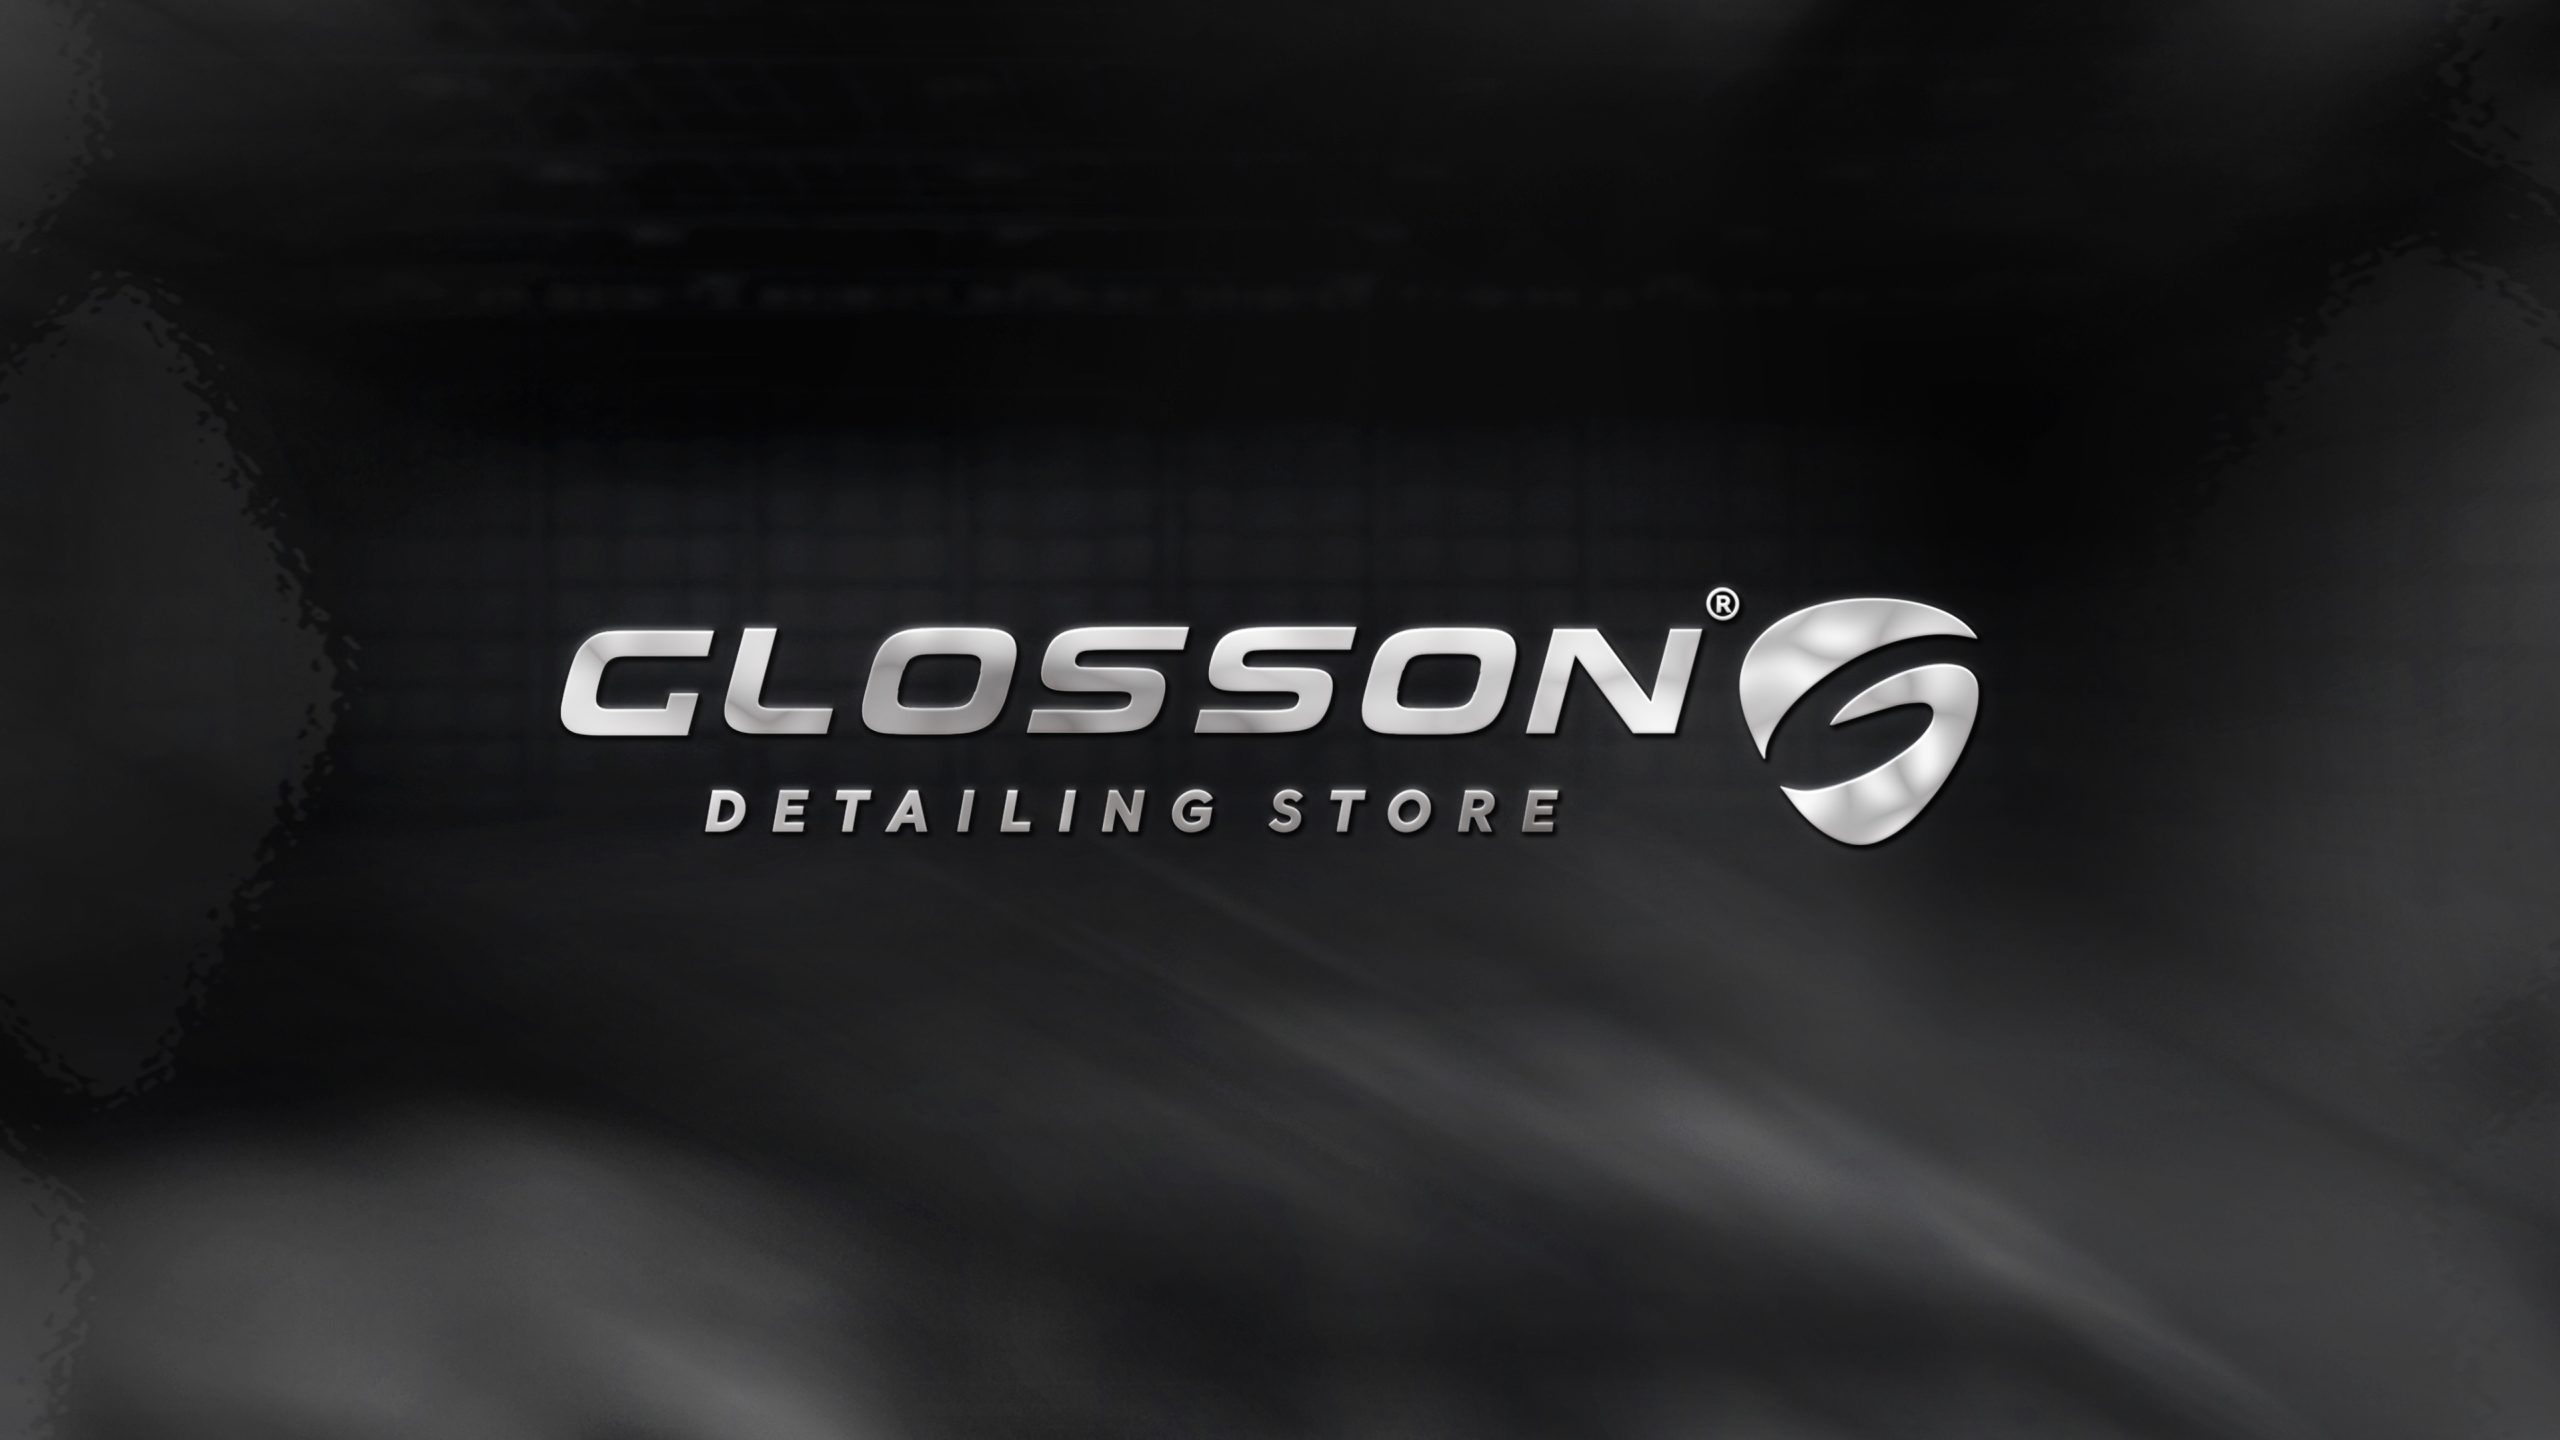 Glosson - Detailing Store